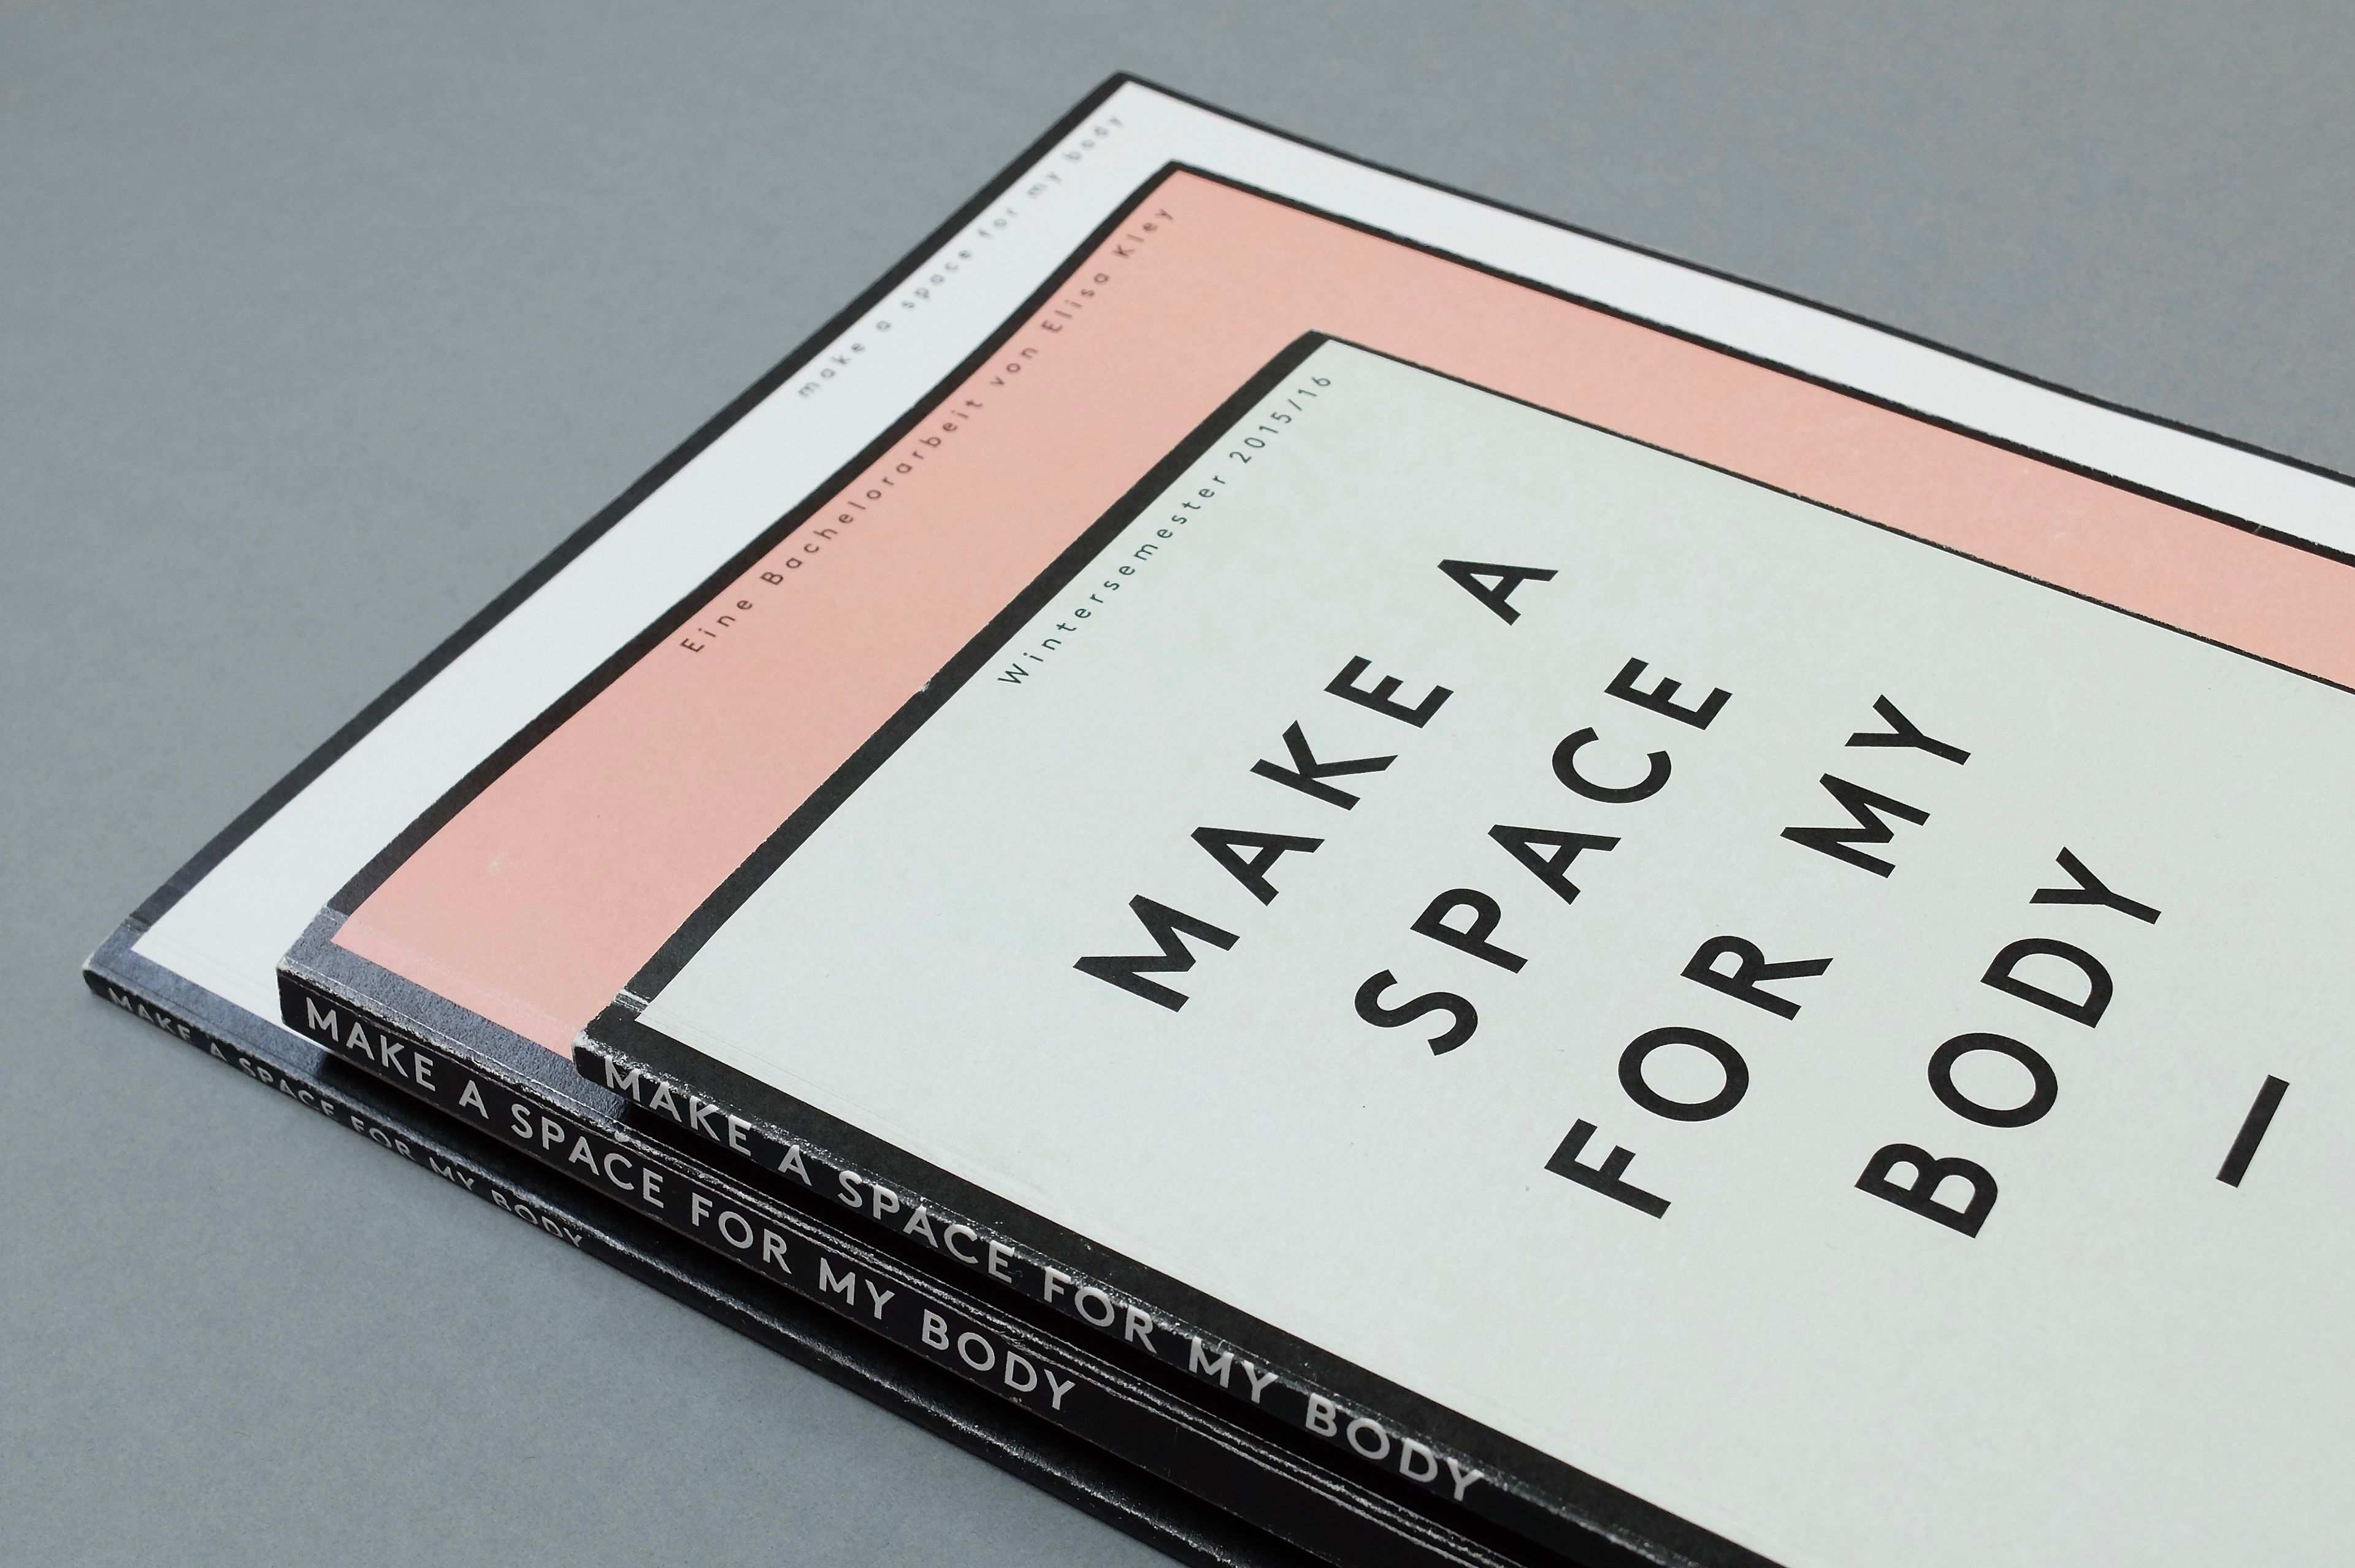 Make A Space For My Body Is The Bachelor Thesis Of Fashion Designer Elisa Kley Inspired By Her Own Feeling Of Travel She Creat Editorial Design Grafik Ideen